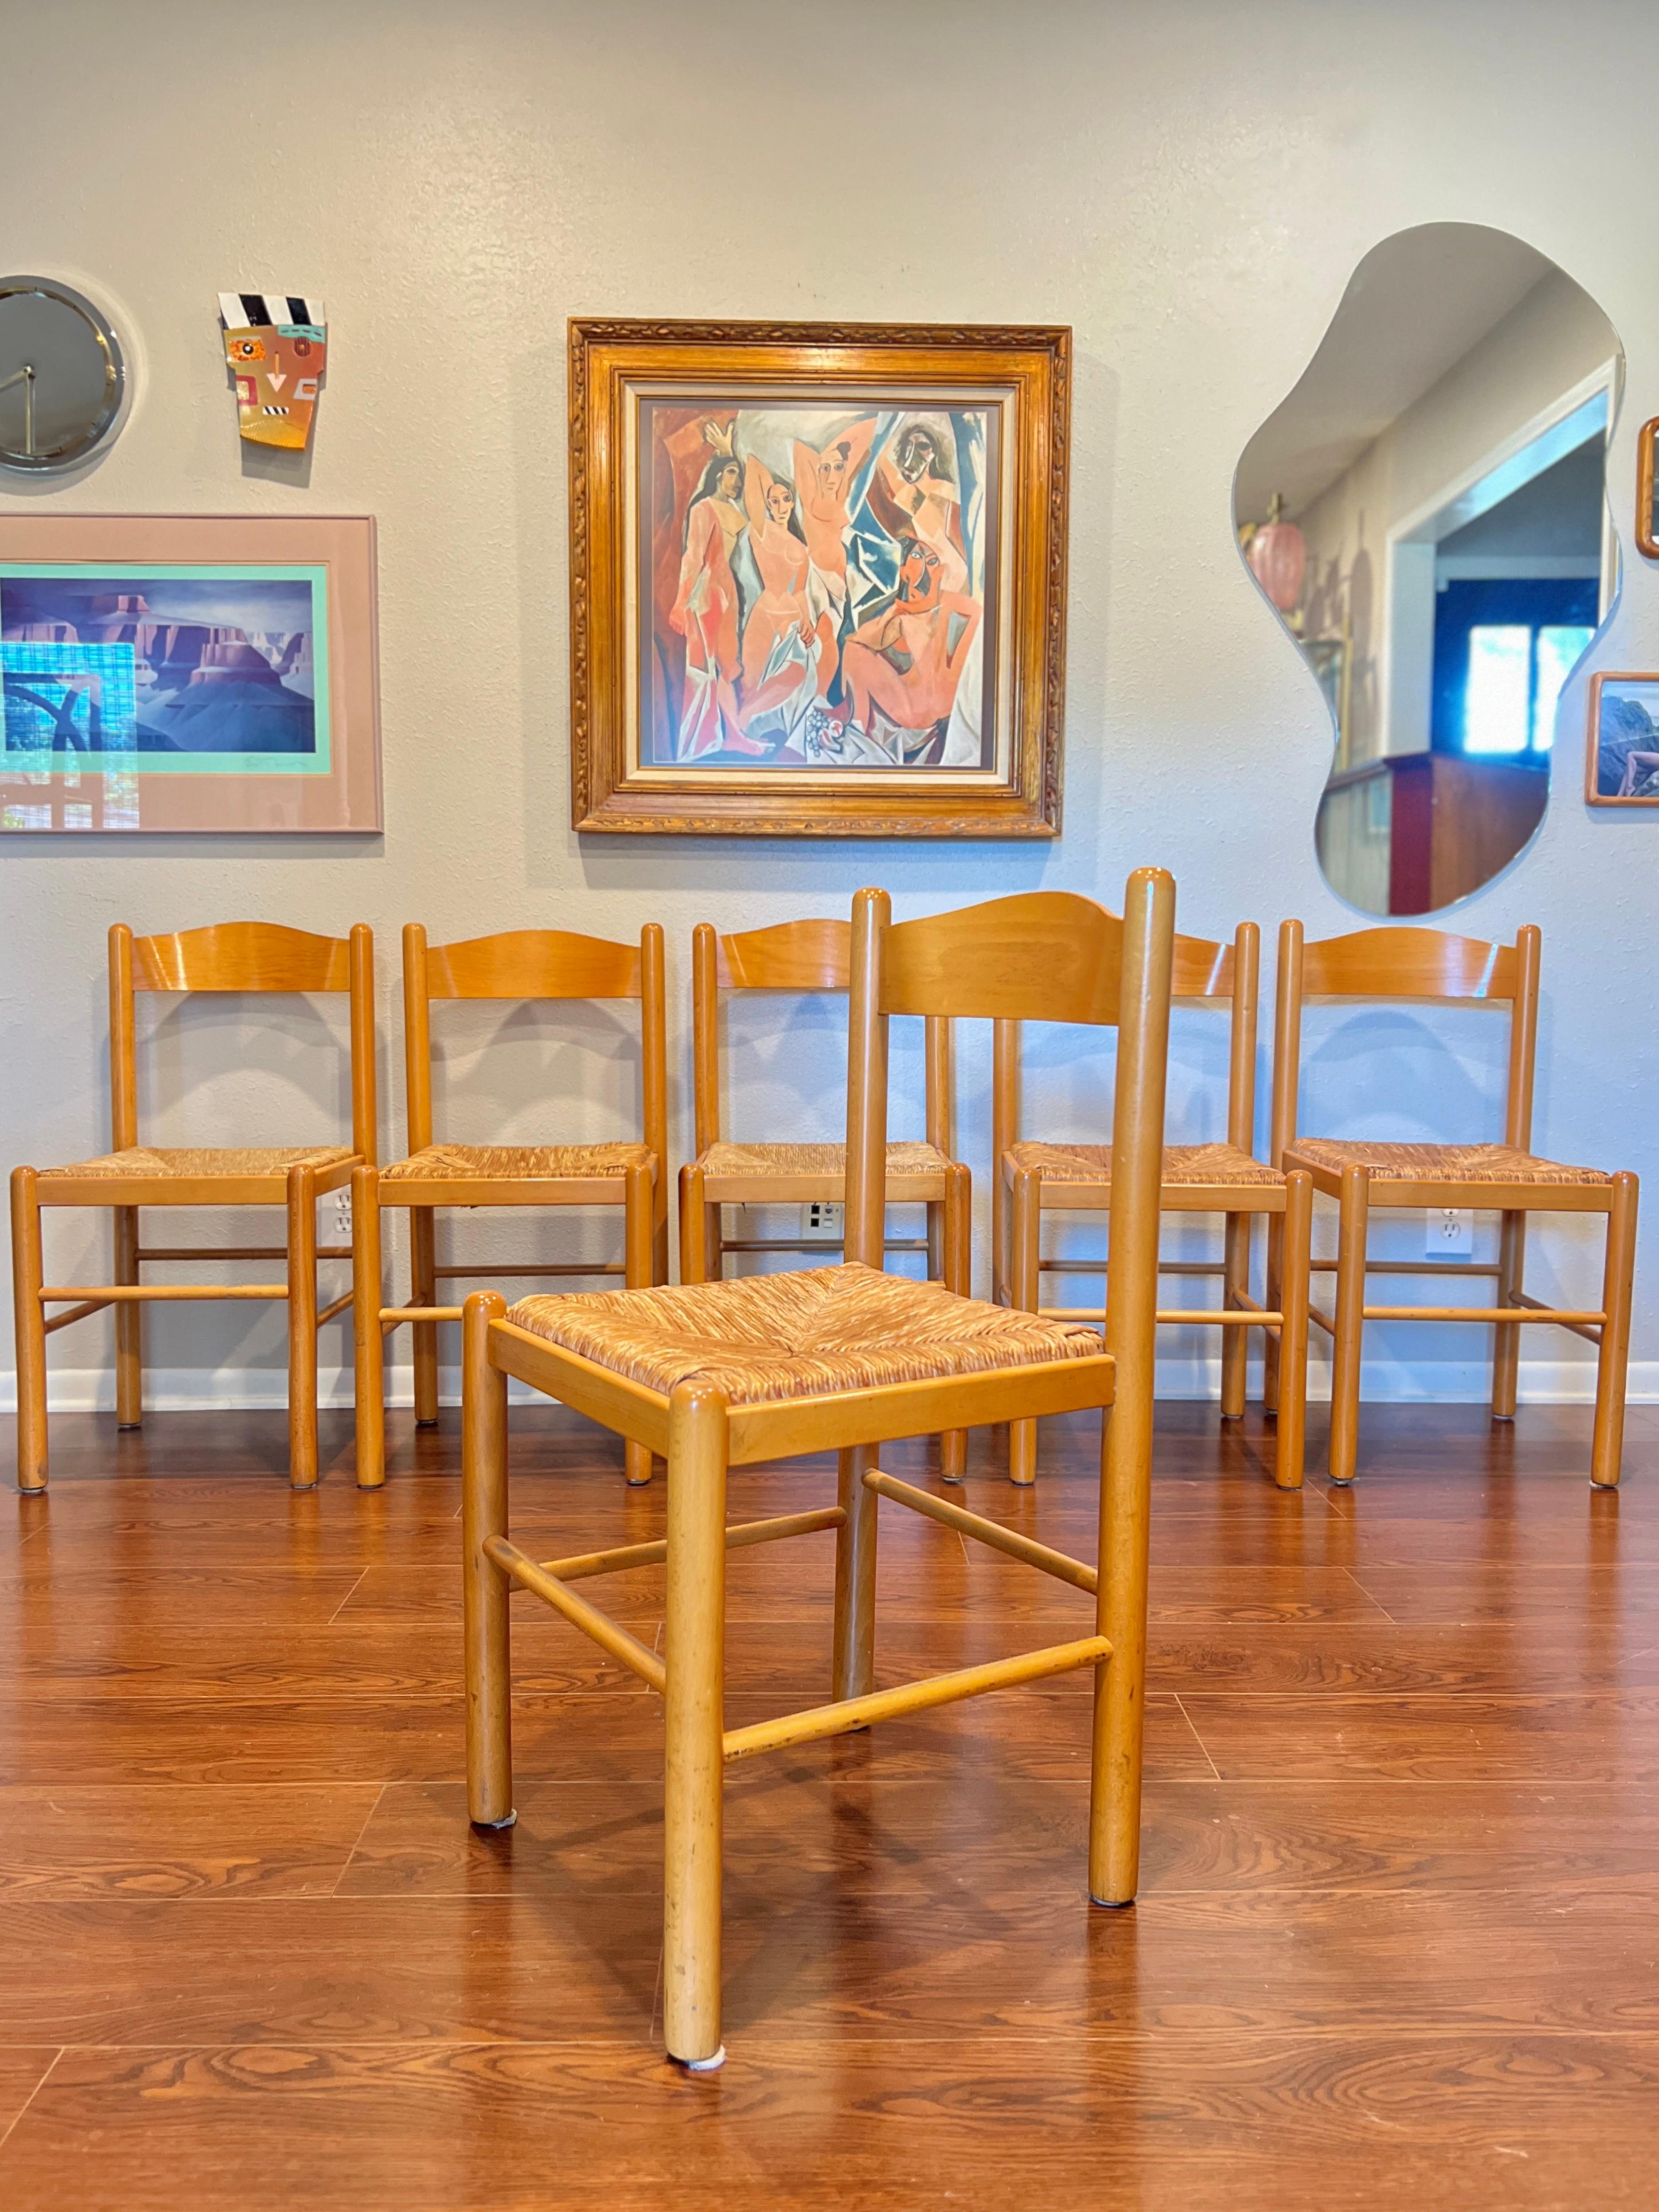 Rush A set of 6 vintage chairs in rush and solid wood frames, circa 1970s